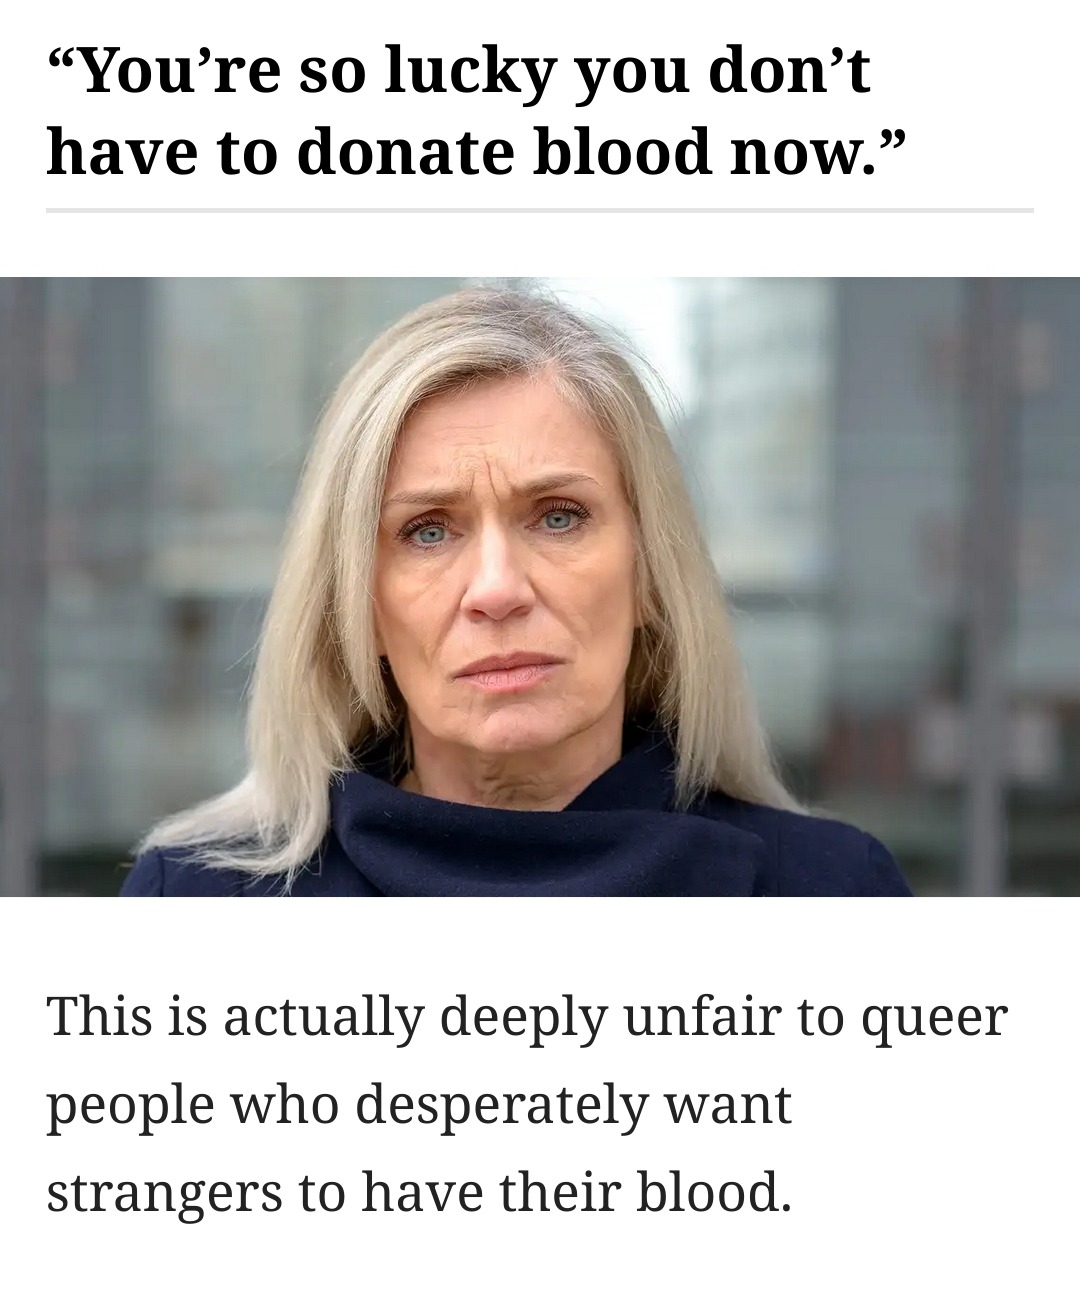 Picture from Onion Article.  You're so lucky you don't have to donate blood now.  This is actually deeply unfair to queer people who desperately want strangers to have their blood.